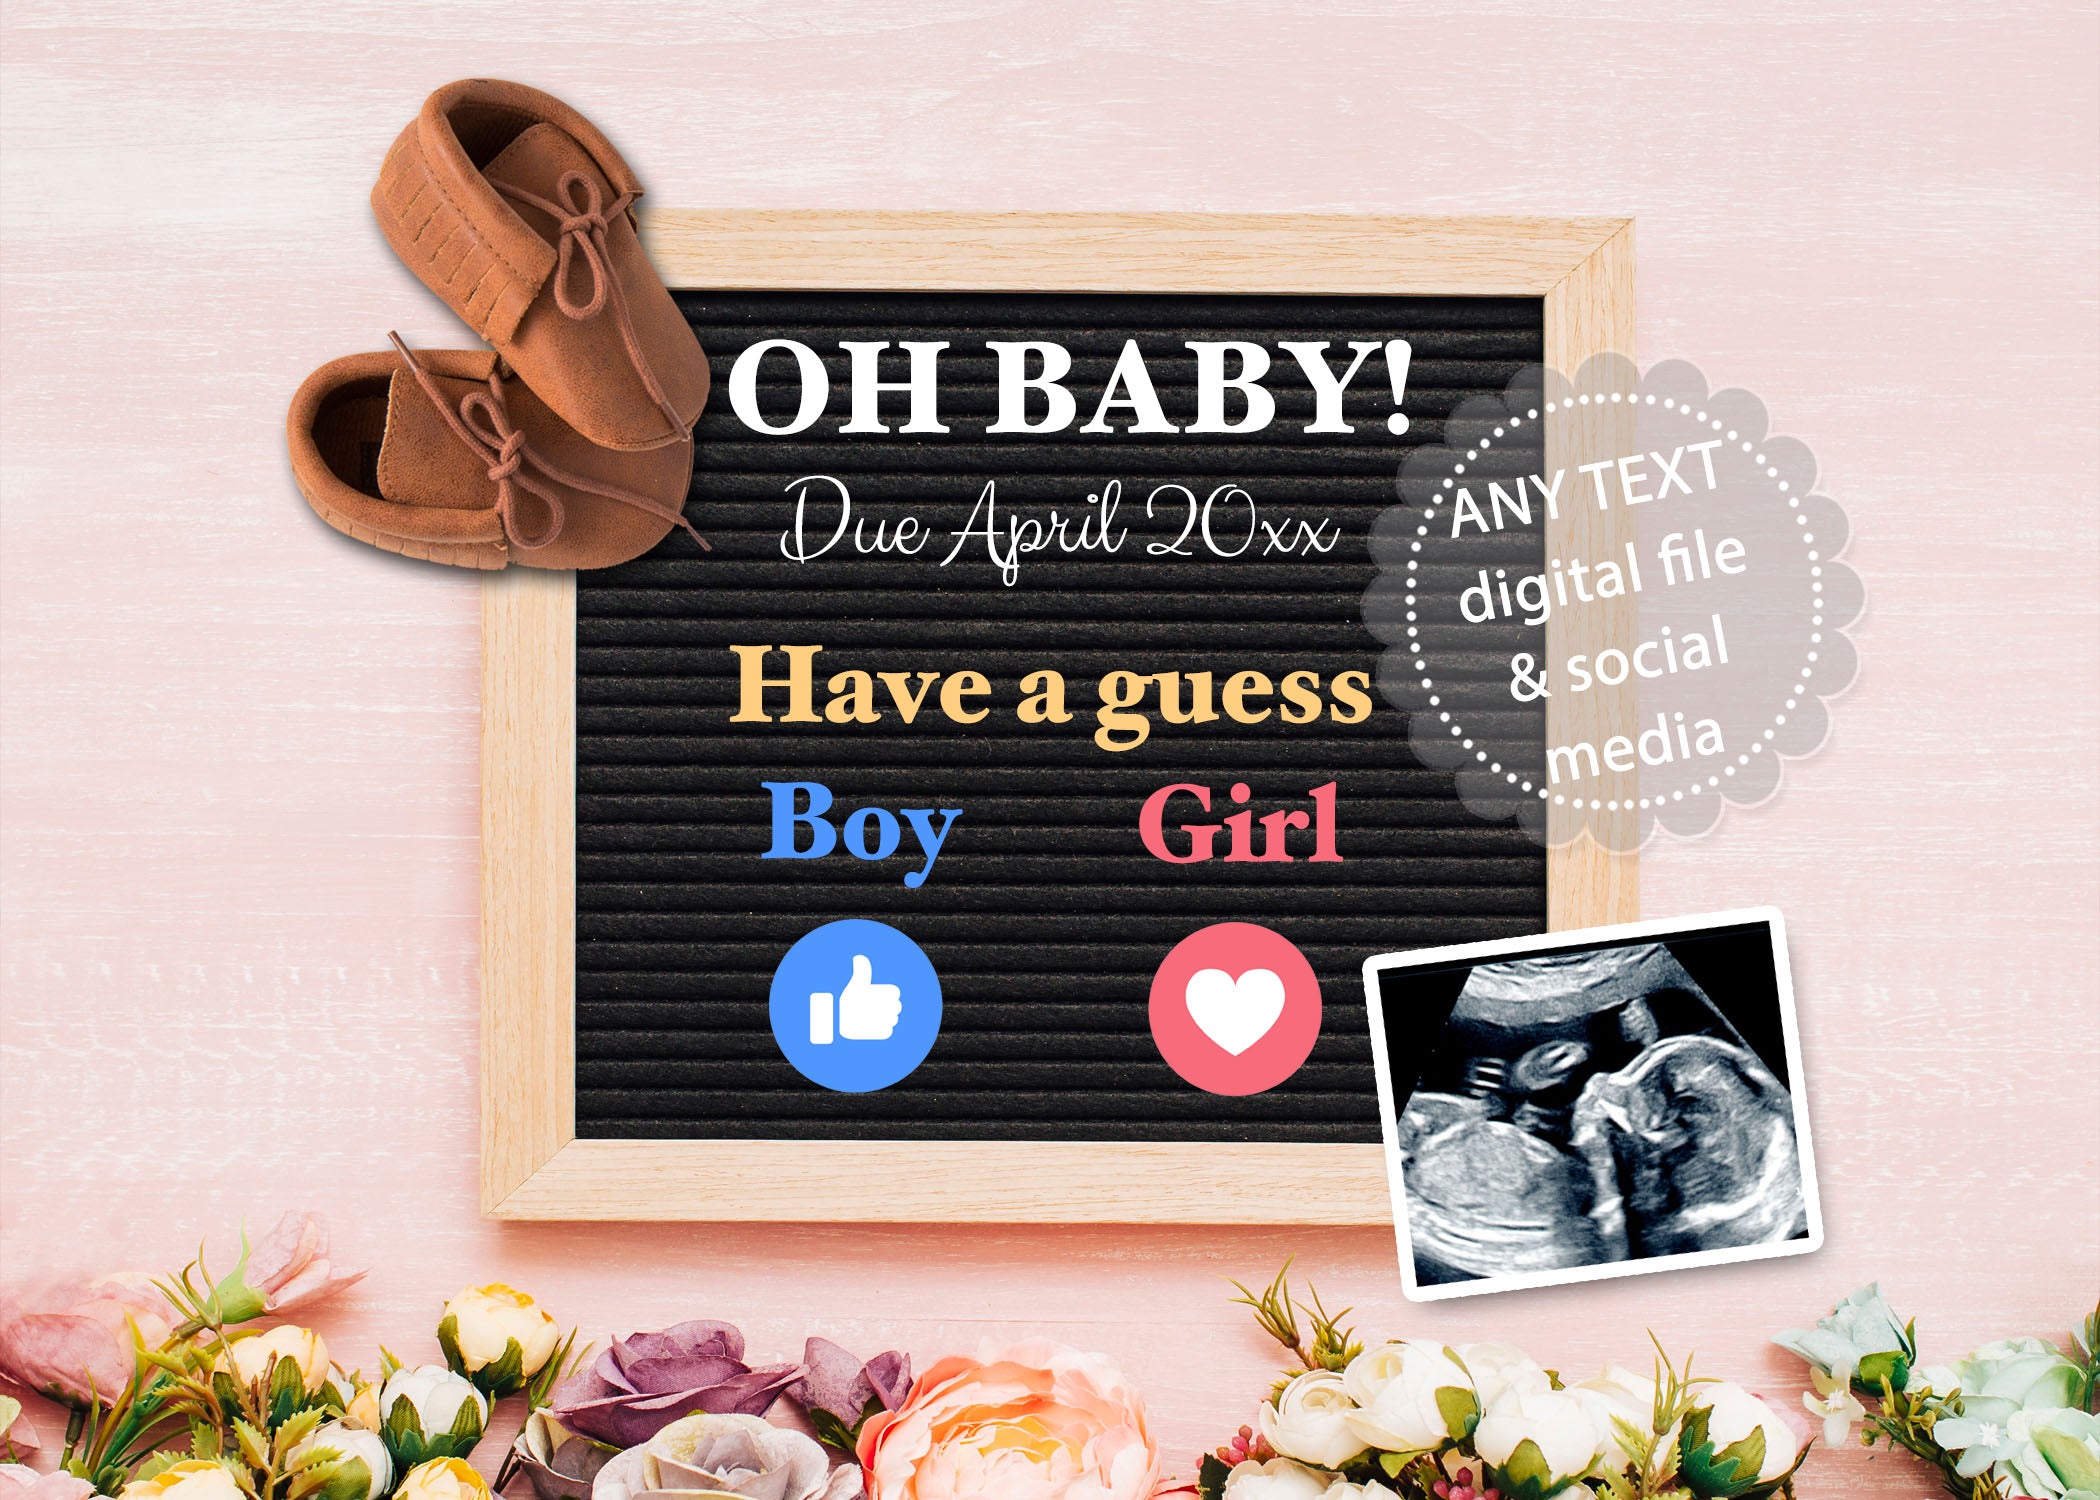 Pregnancy announcement social media oh baby